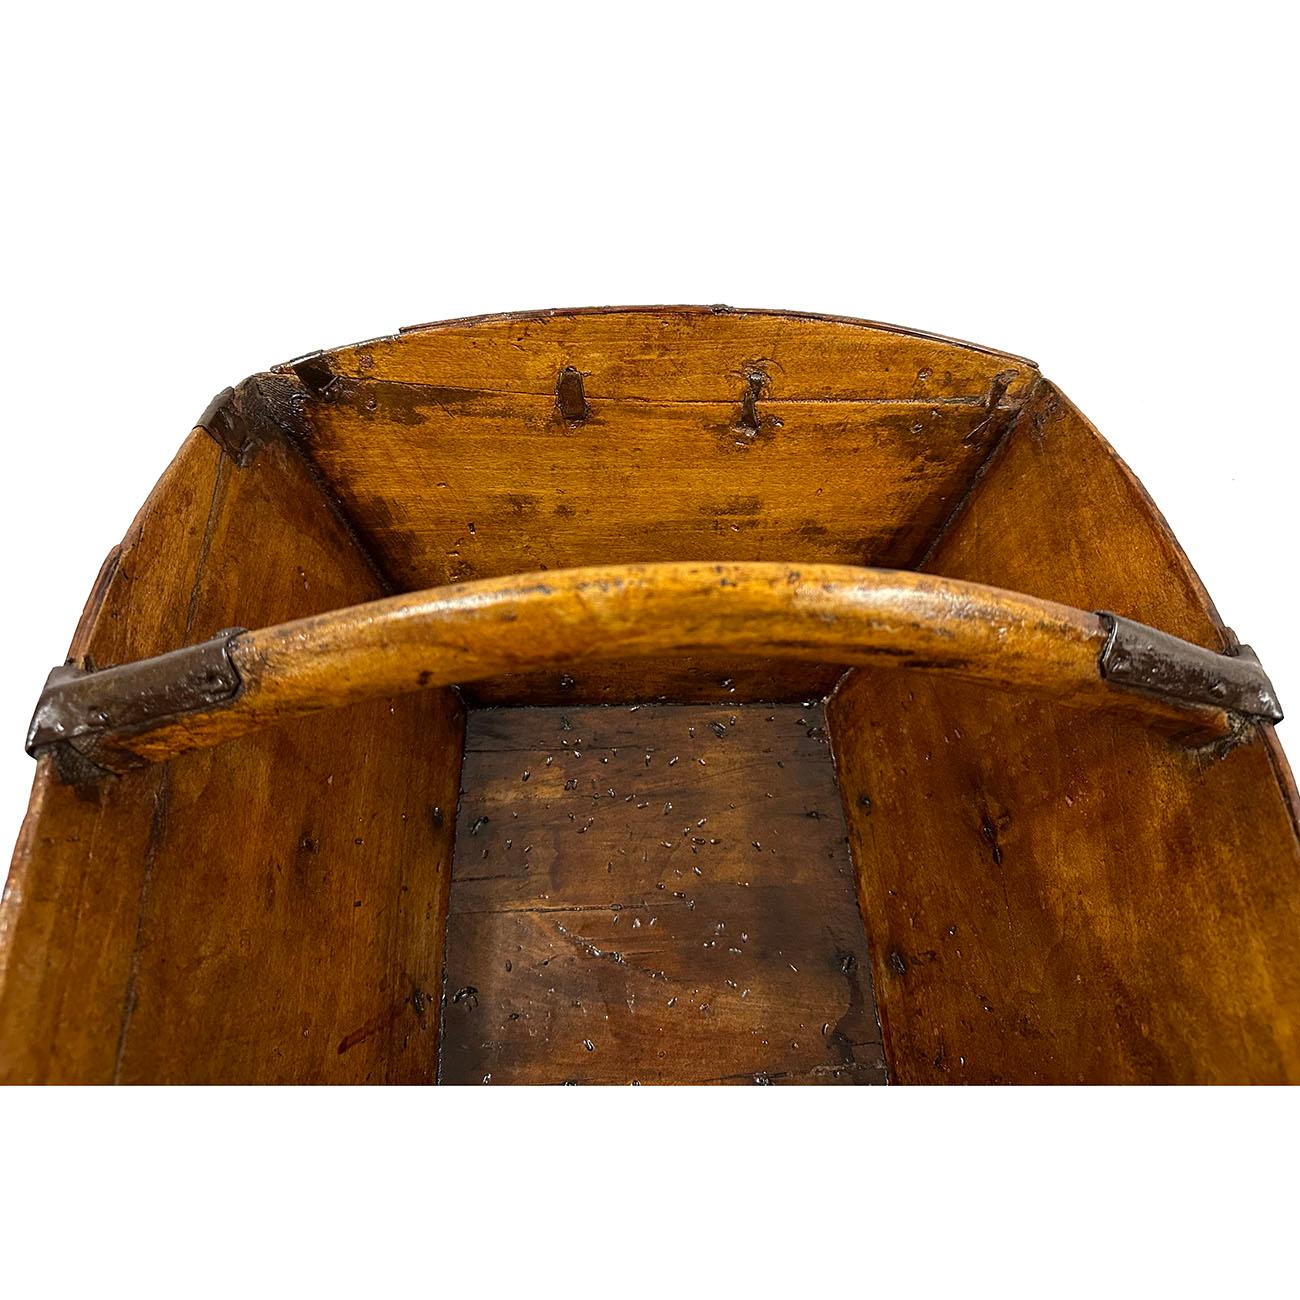 19th Century Antique Chinese Wooden Rice Measure Bucket For Sale 1